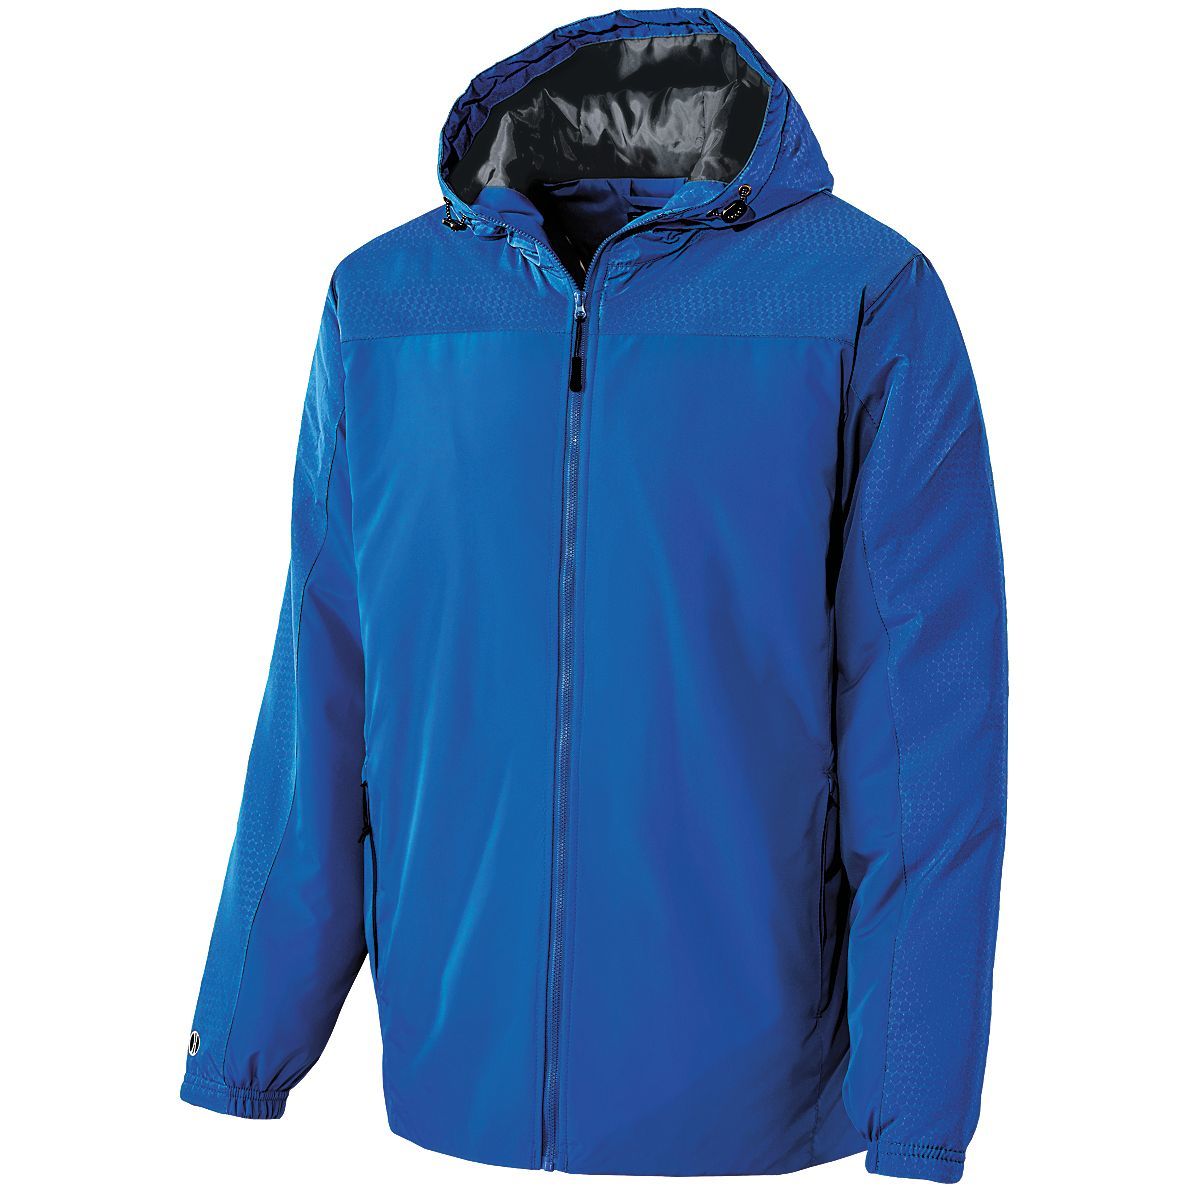 Holloway Bionic Hooded Jacket in Royal/Carbon  -Part of the Adult, Adult-Jacket, Holloway, Outerwear product lines at KanaleyCreations.com